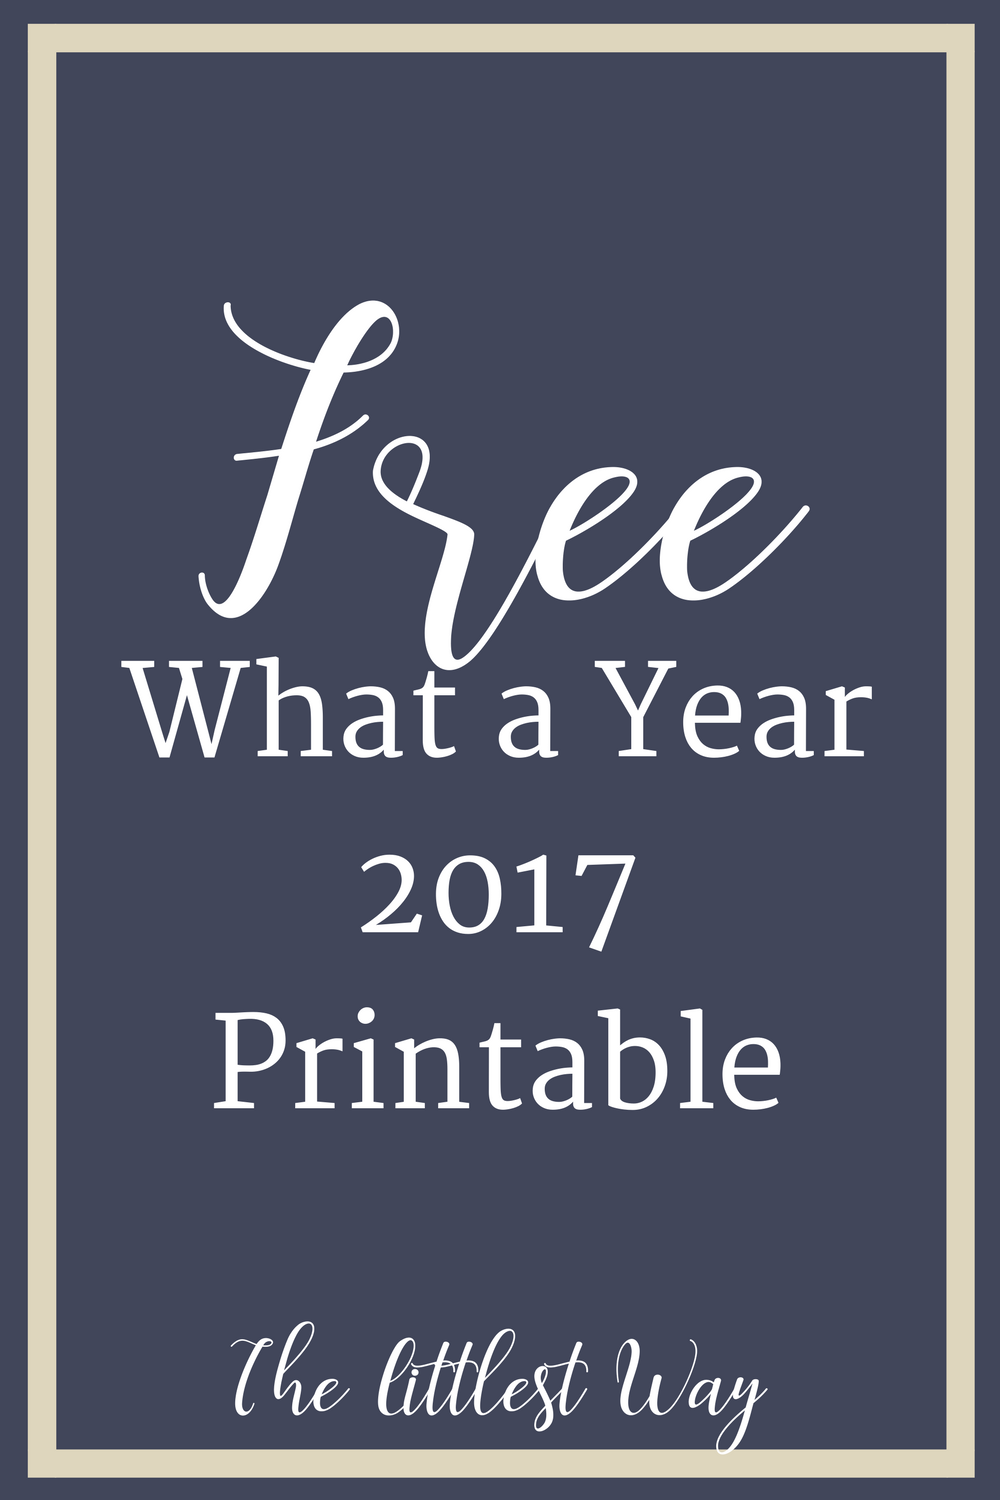 This free What a Year printable is so much fun to fill out! I keep them stored in a binder so we can look back on them year after year..